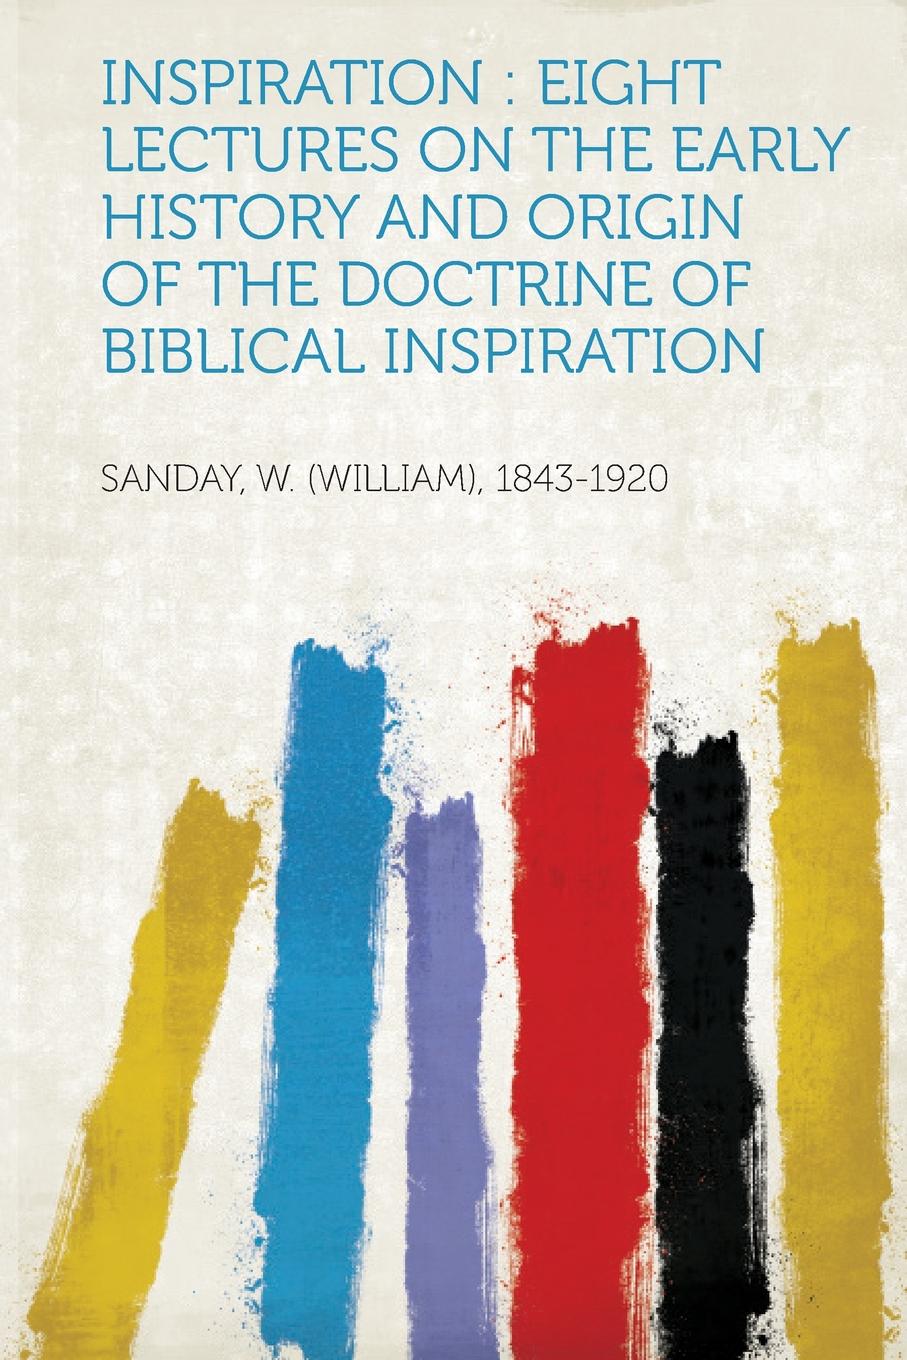 Inspiration. Eight Lectures on the Early History and Origin of the Doctrine of Biblical Inspiration